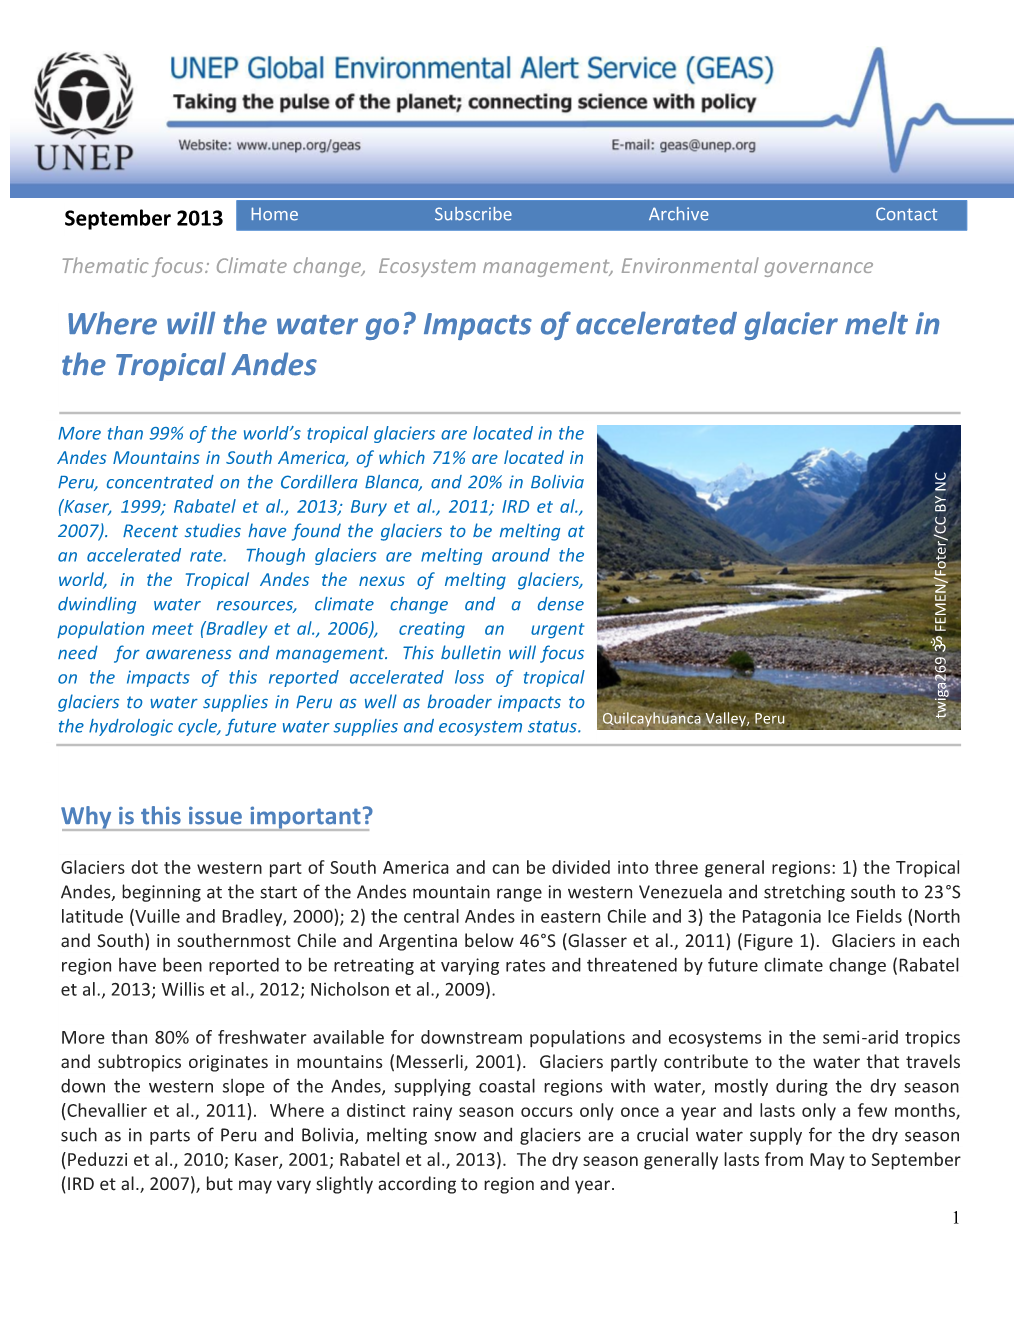 Where Will the Water Go? Impacts of Accelerated Glacier Melt in the Tropical Andes